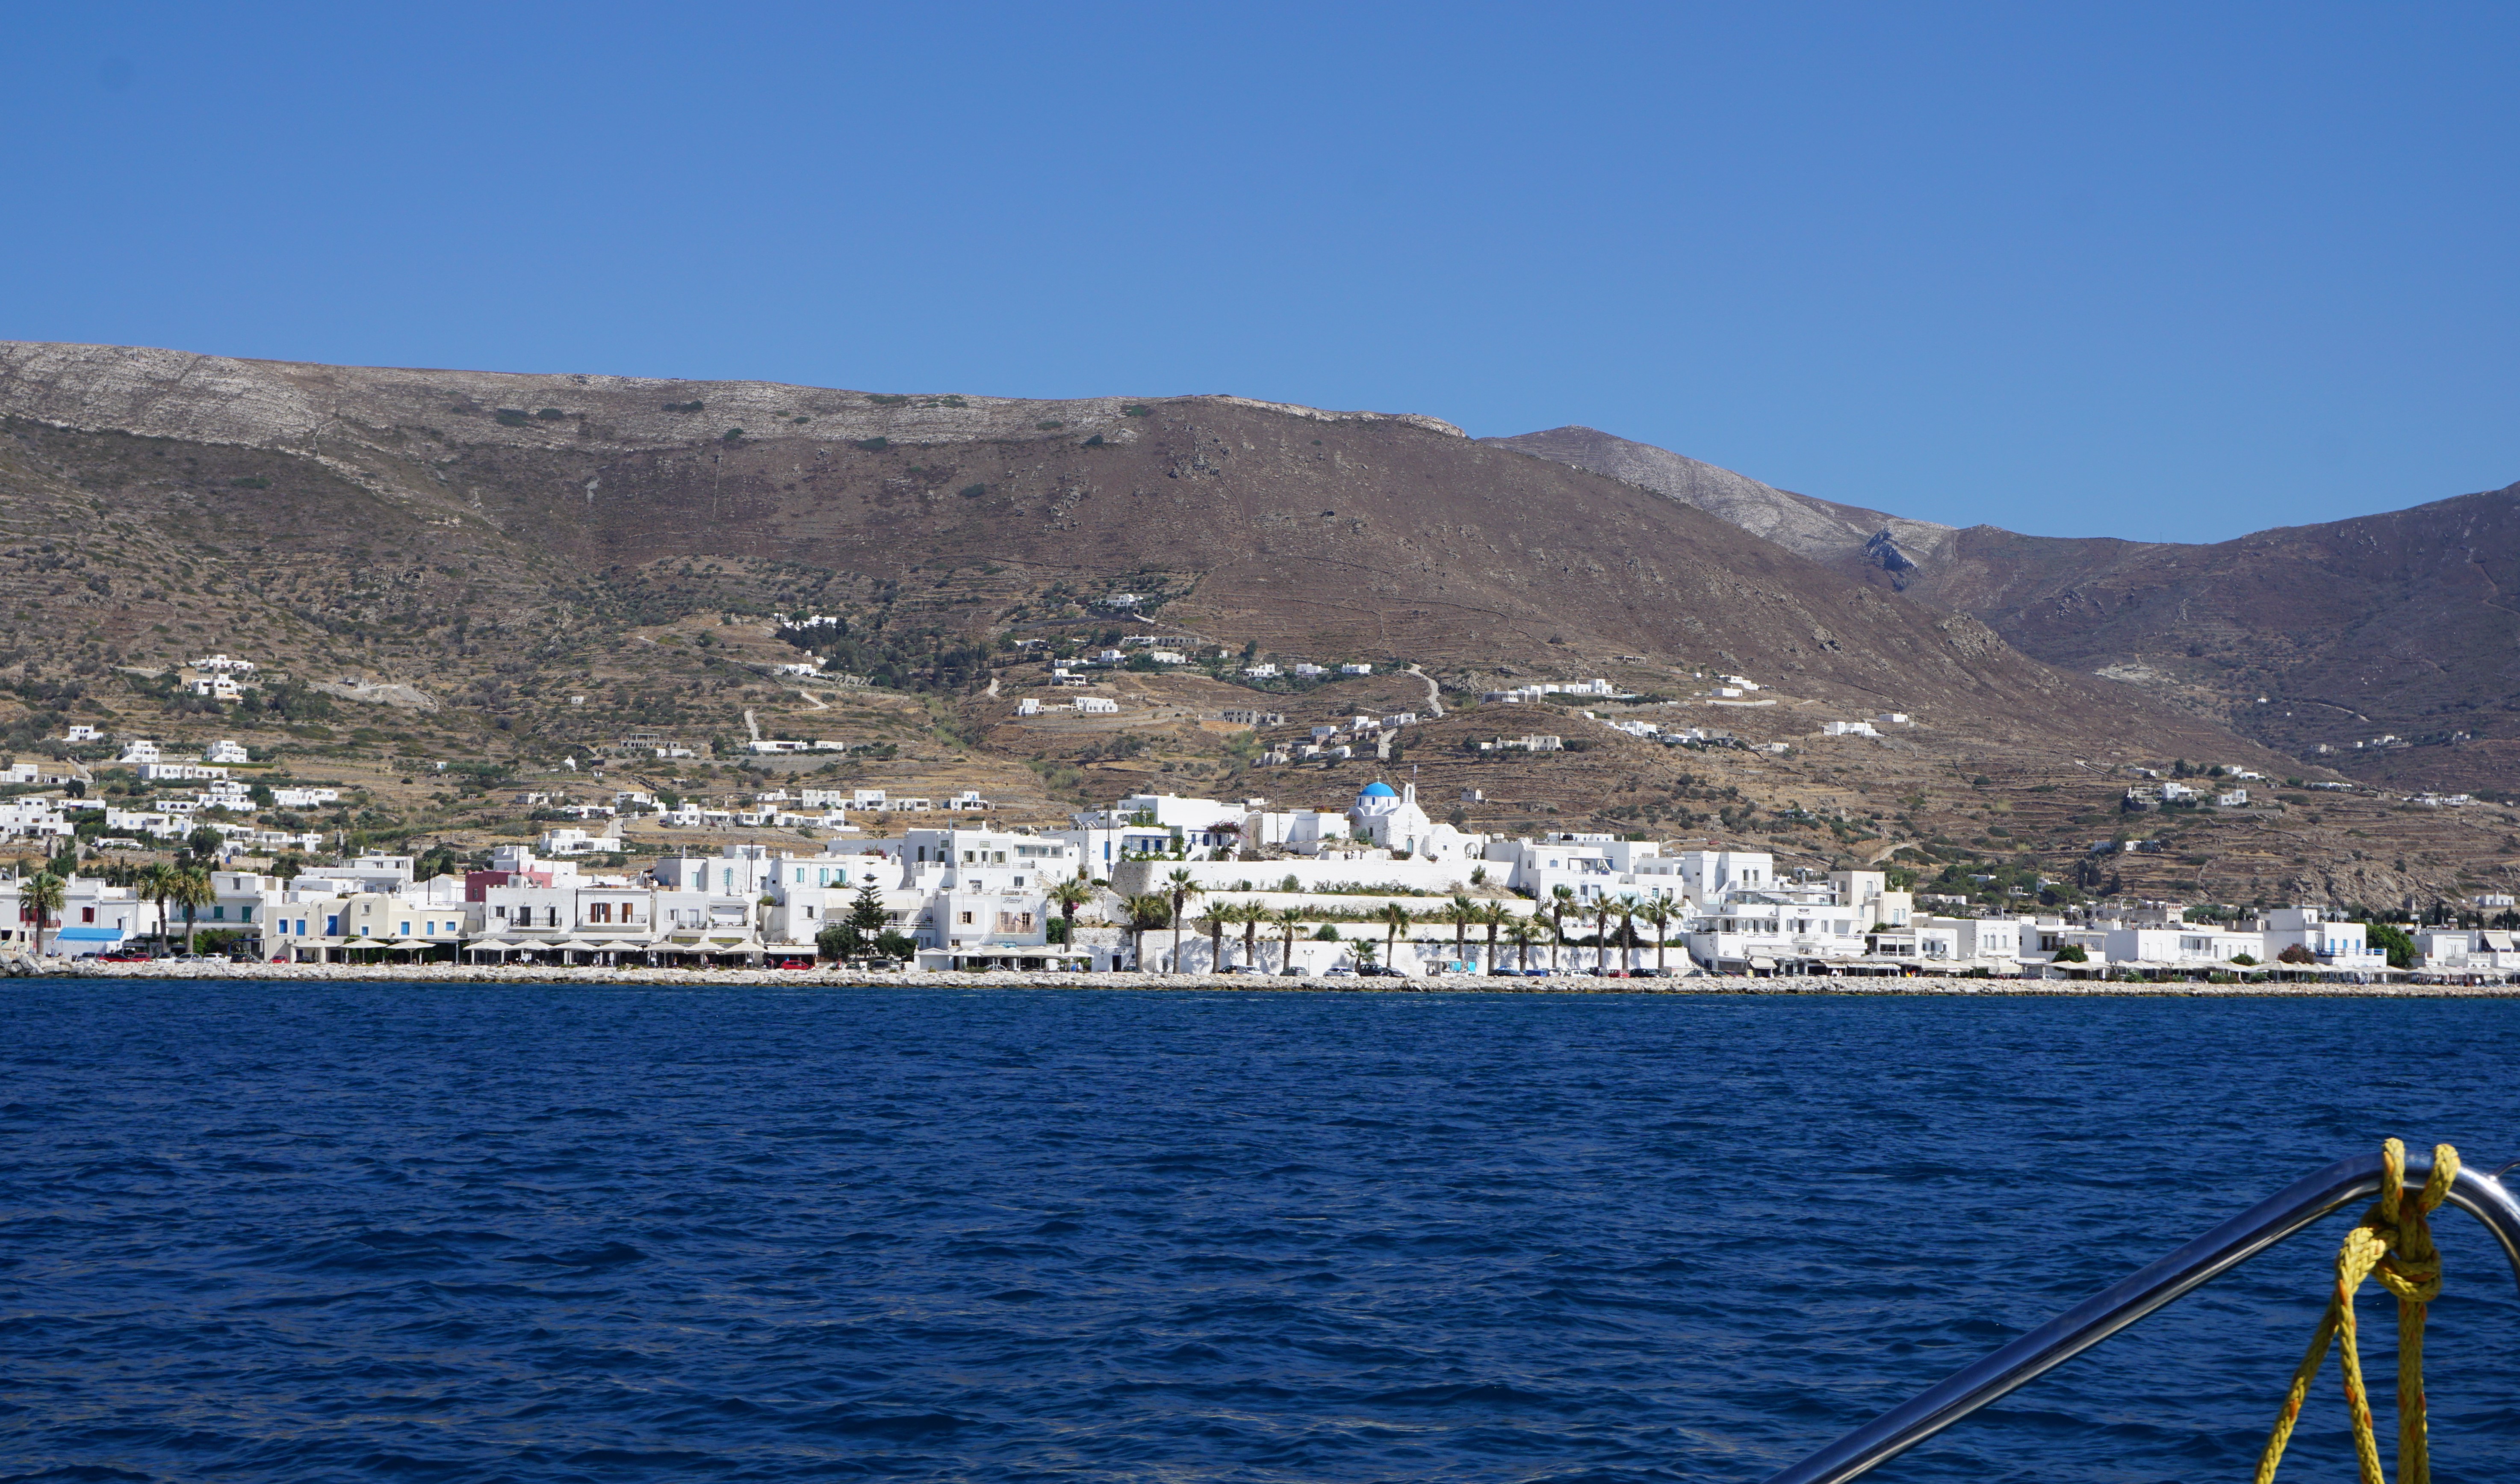 Paros With It's White Washed Buildings And Blue Domed Churches